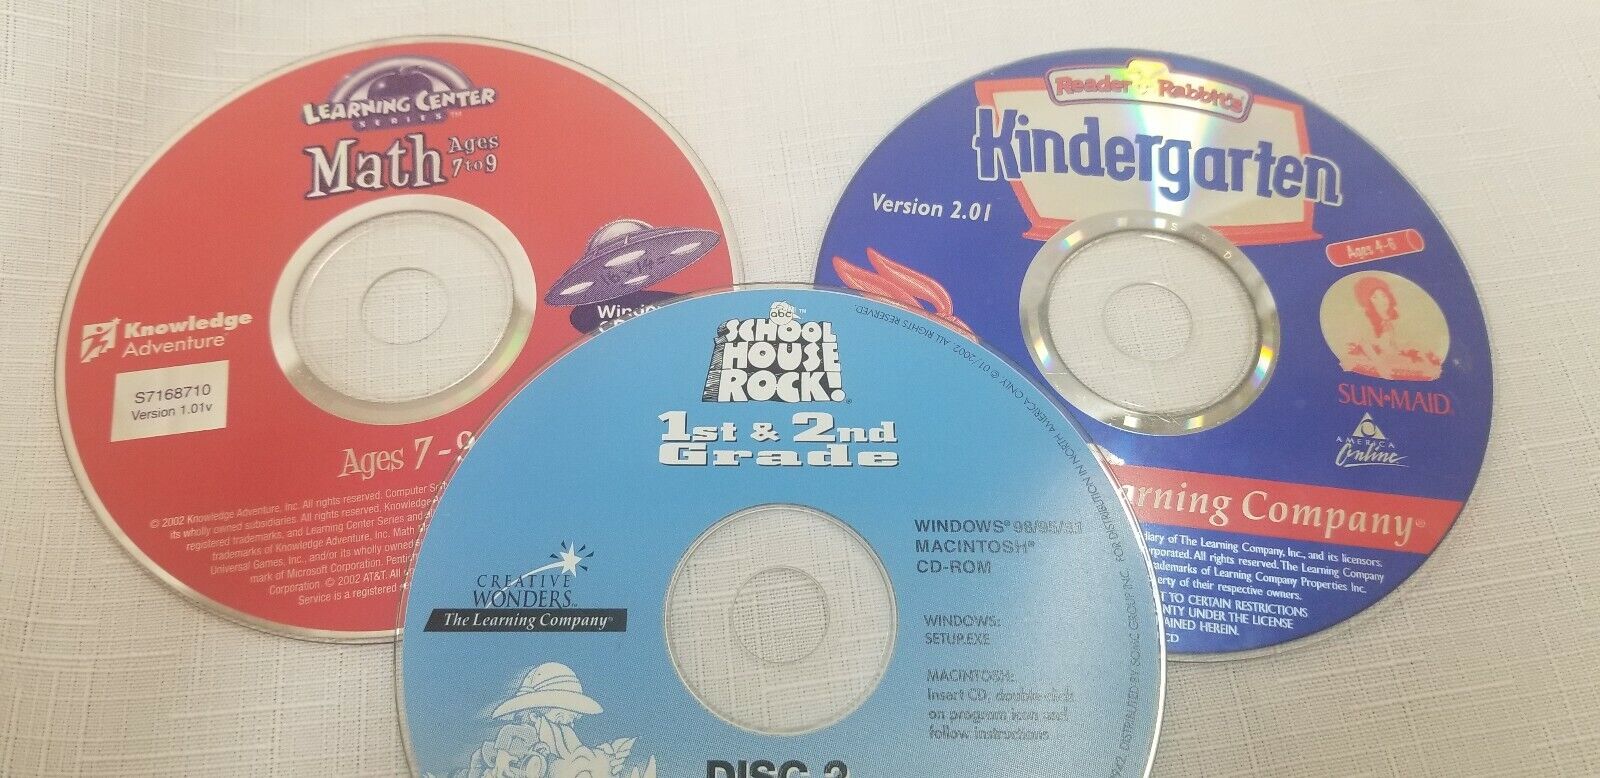 3 Learning Center CDs-Kindergarten, 1st & 2nd gr , Ages 7-9 PC / MAC CD ROM Learning Company